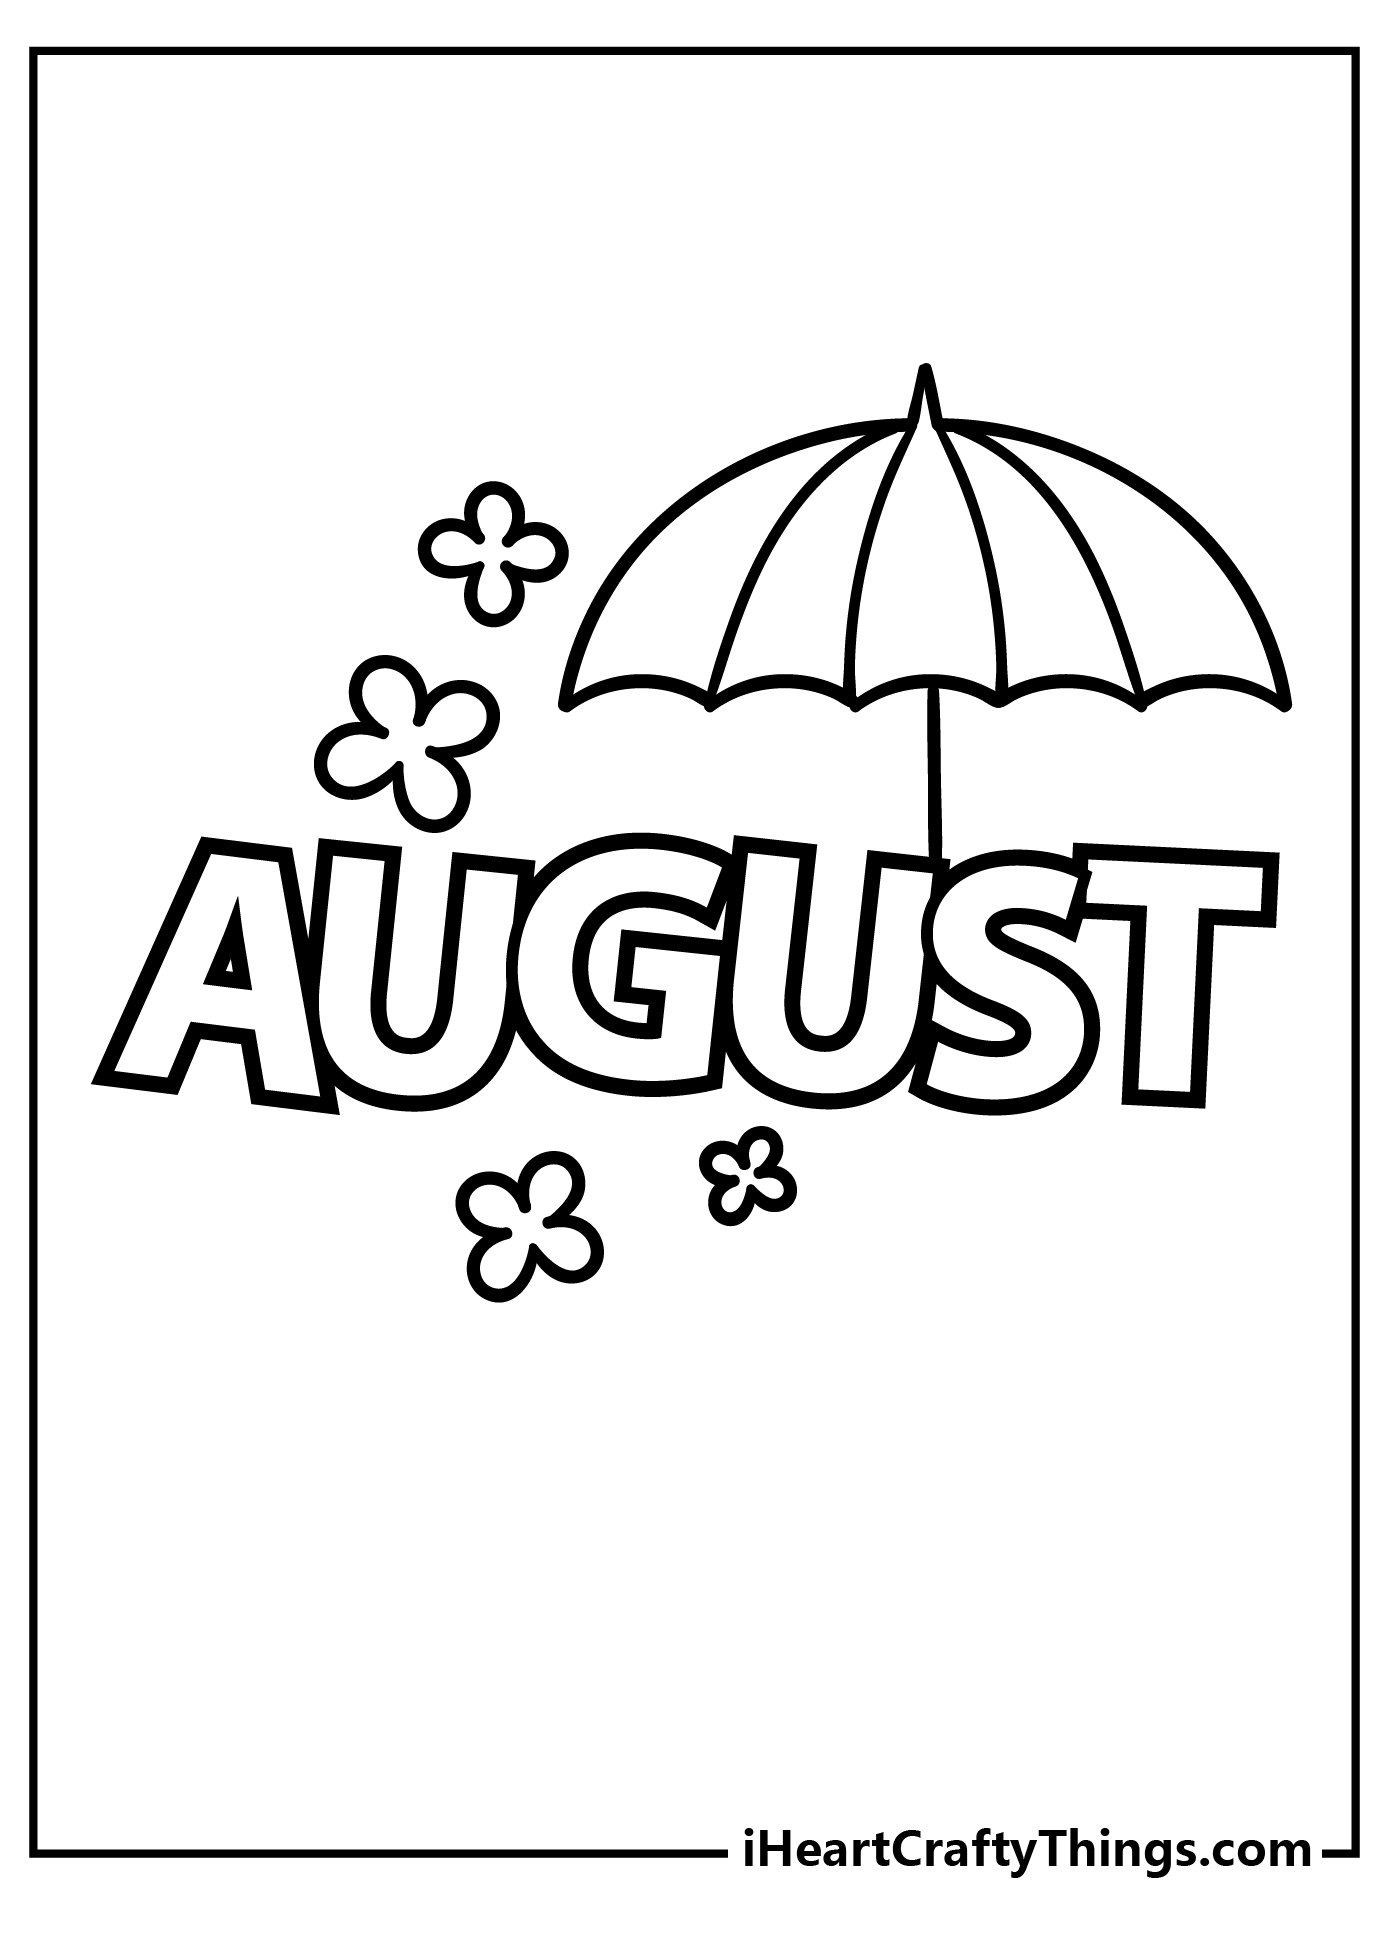 August coloring pages for adults free printable